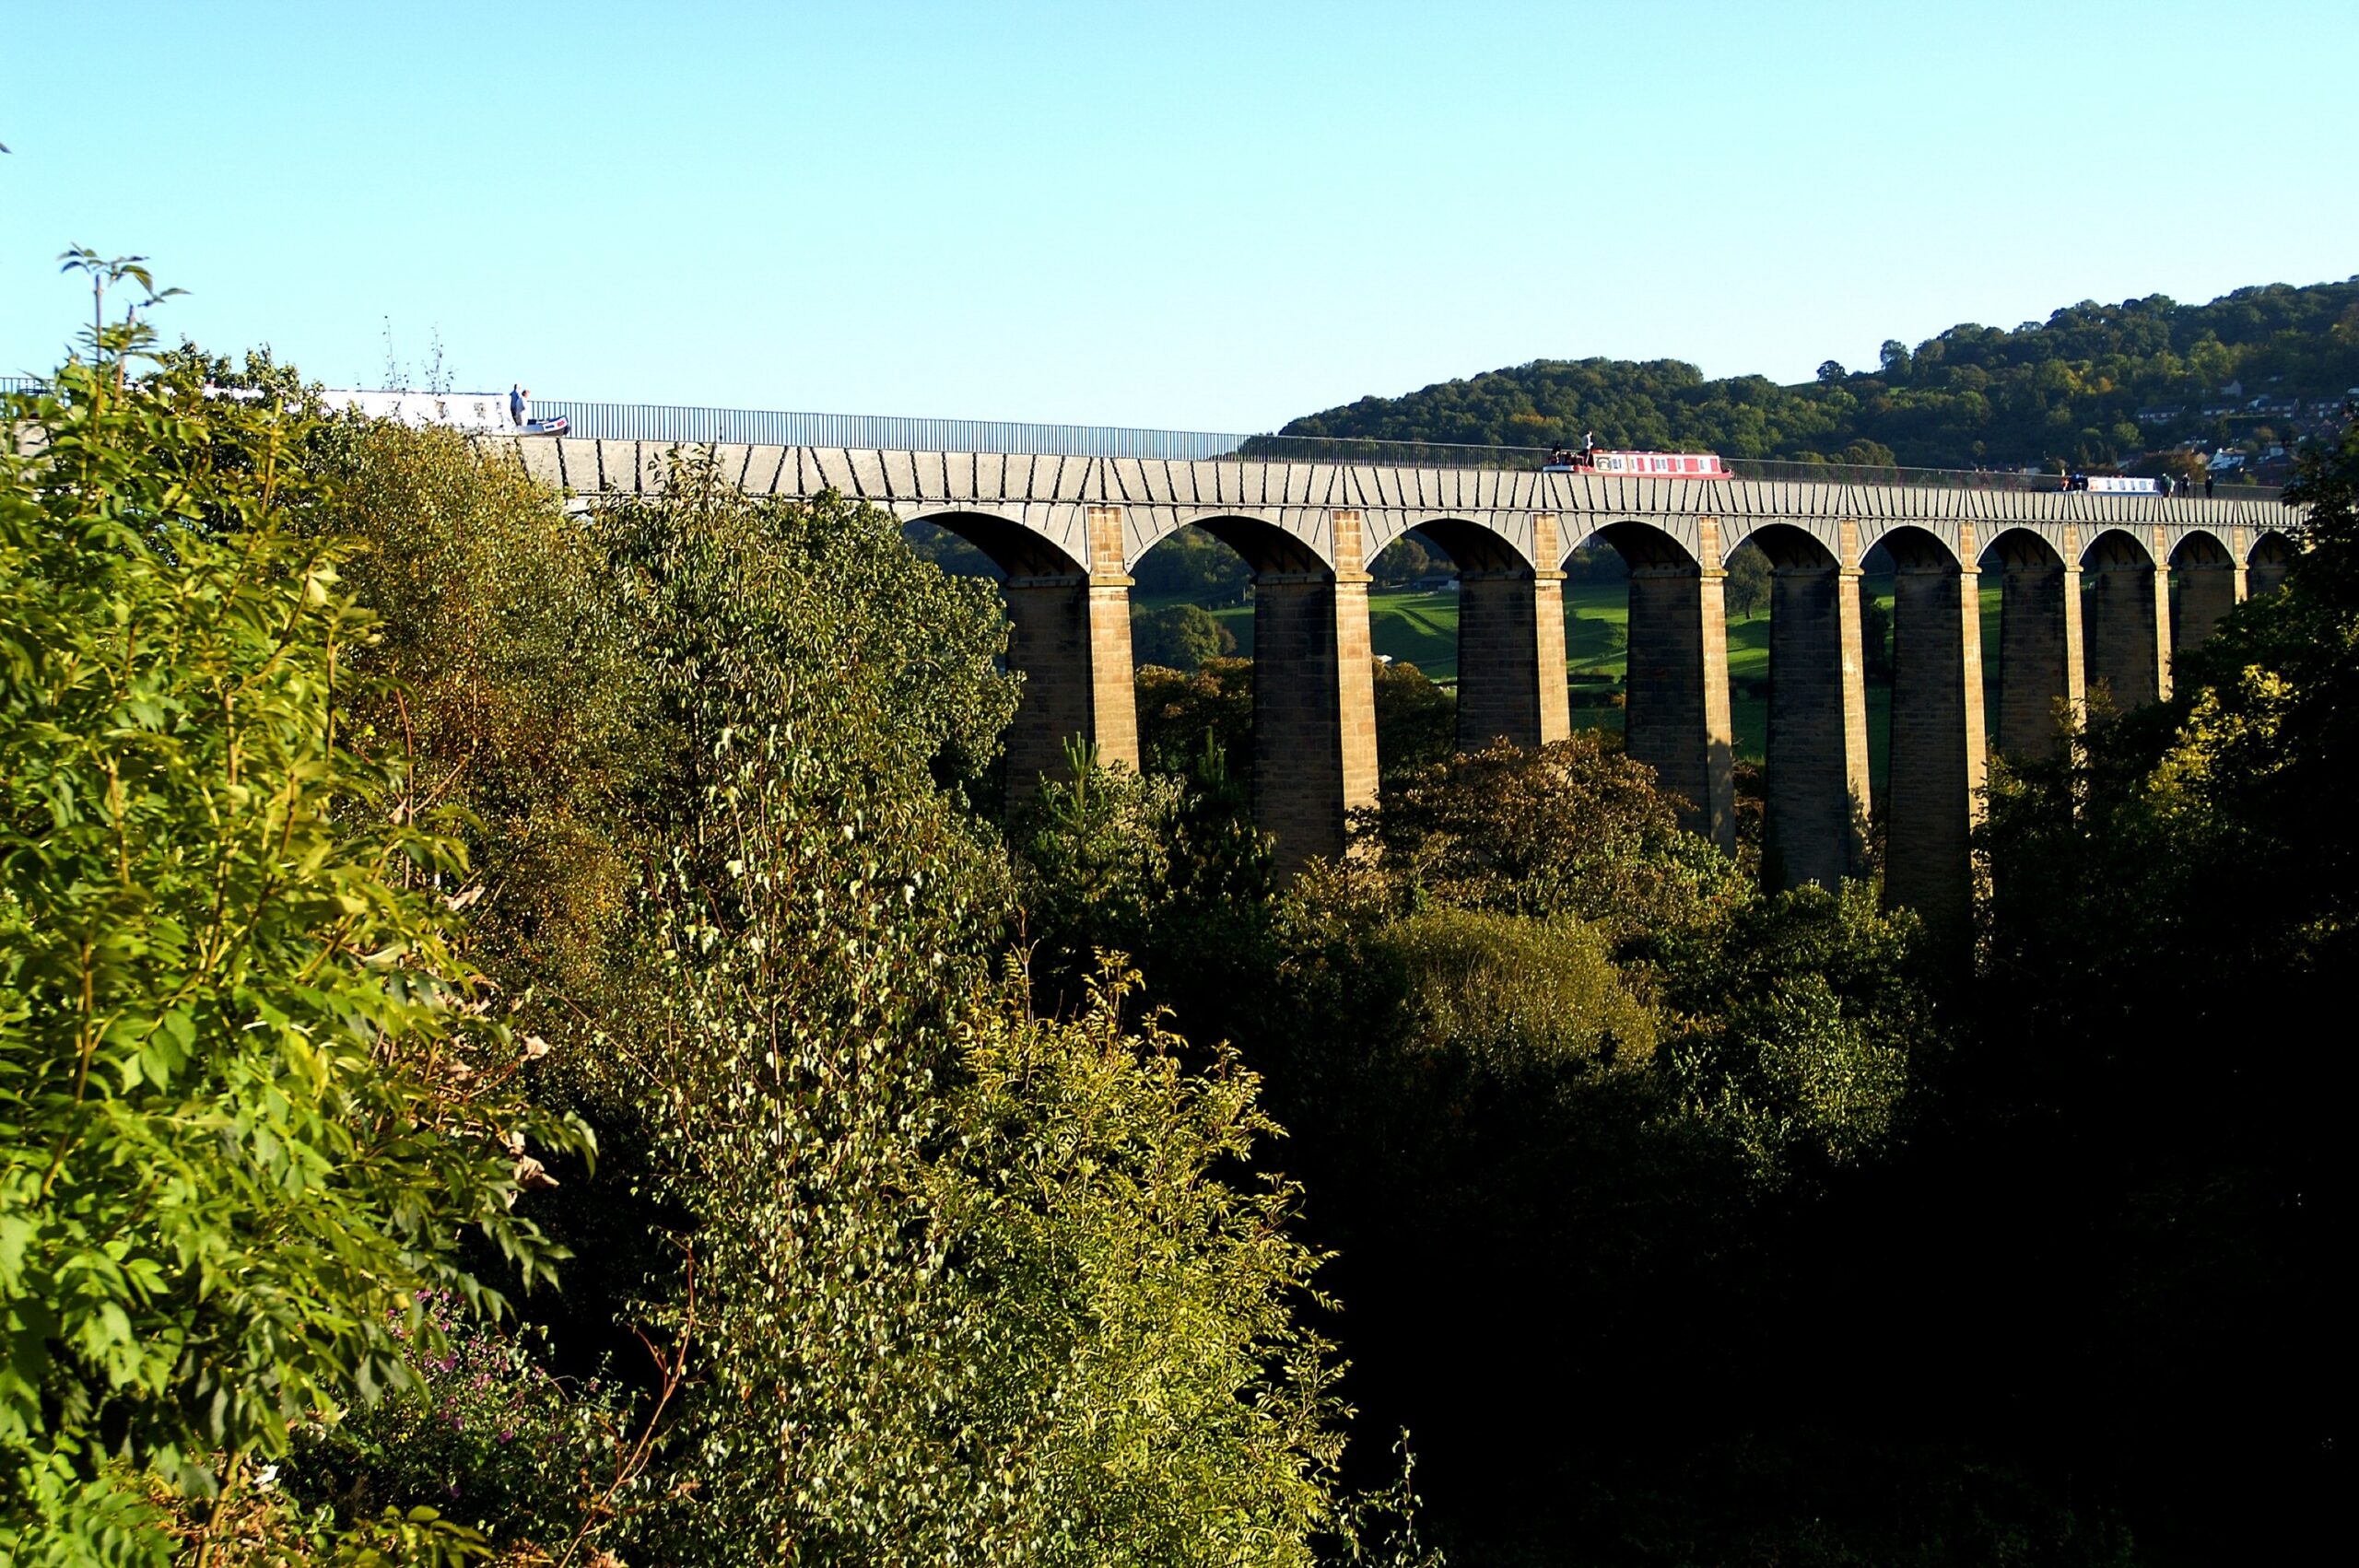 Boat trips across the Pontcysyllte Aqueduct in North Wales